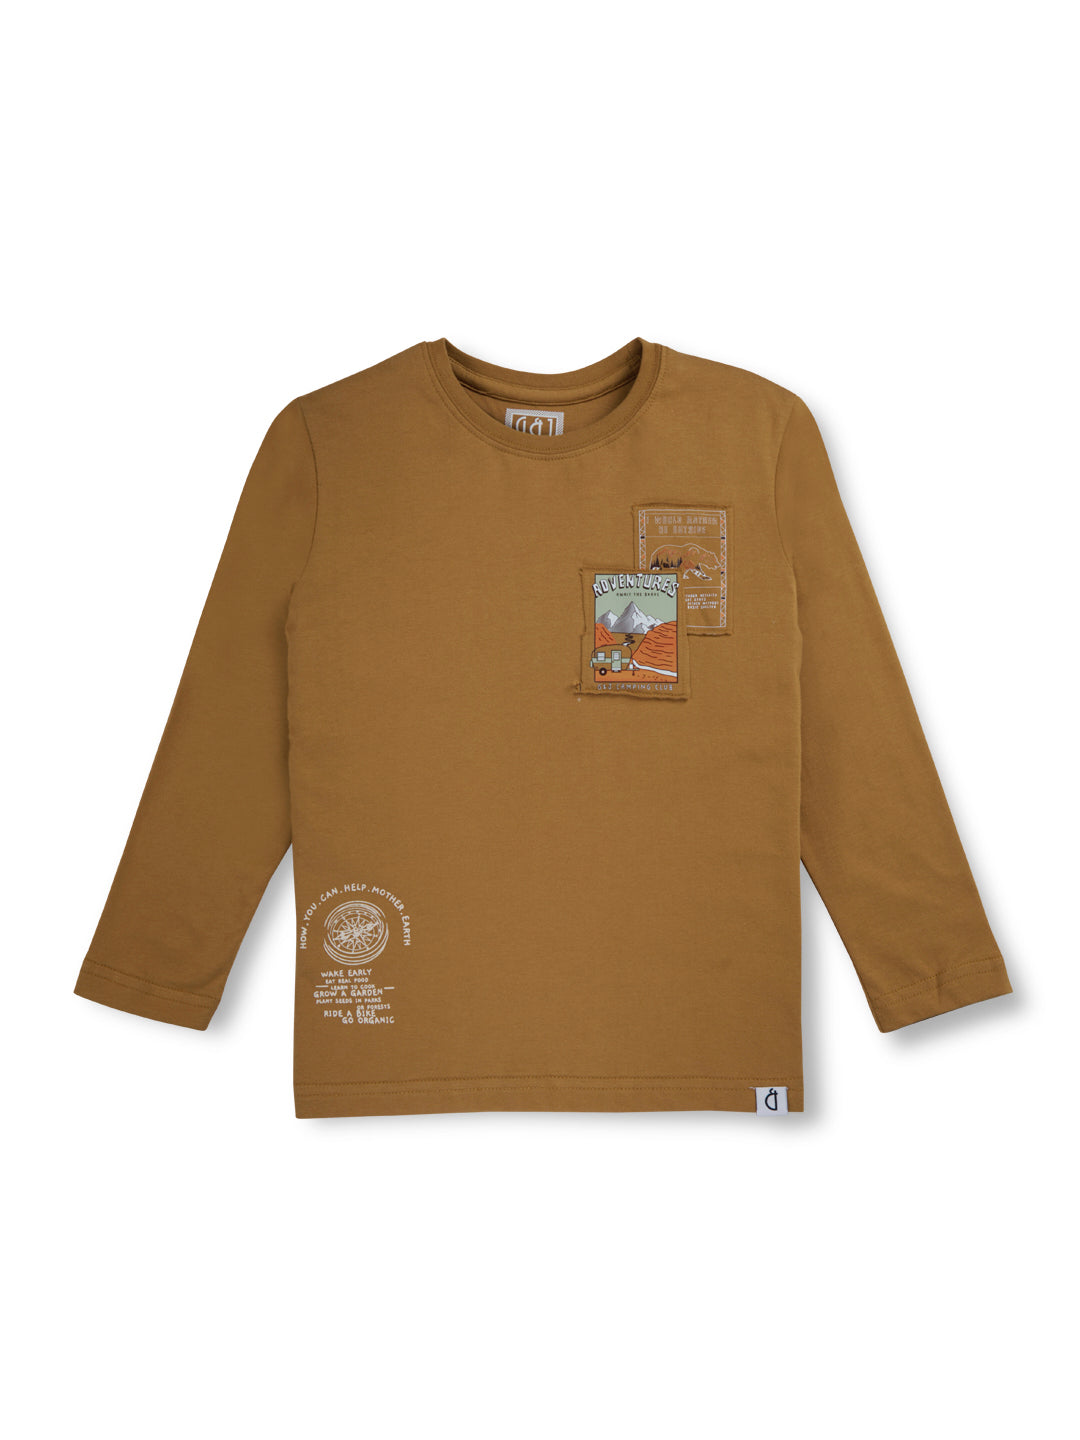 Boys Brown Solid Cotton Full Sleeves T-Shirt